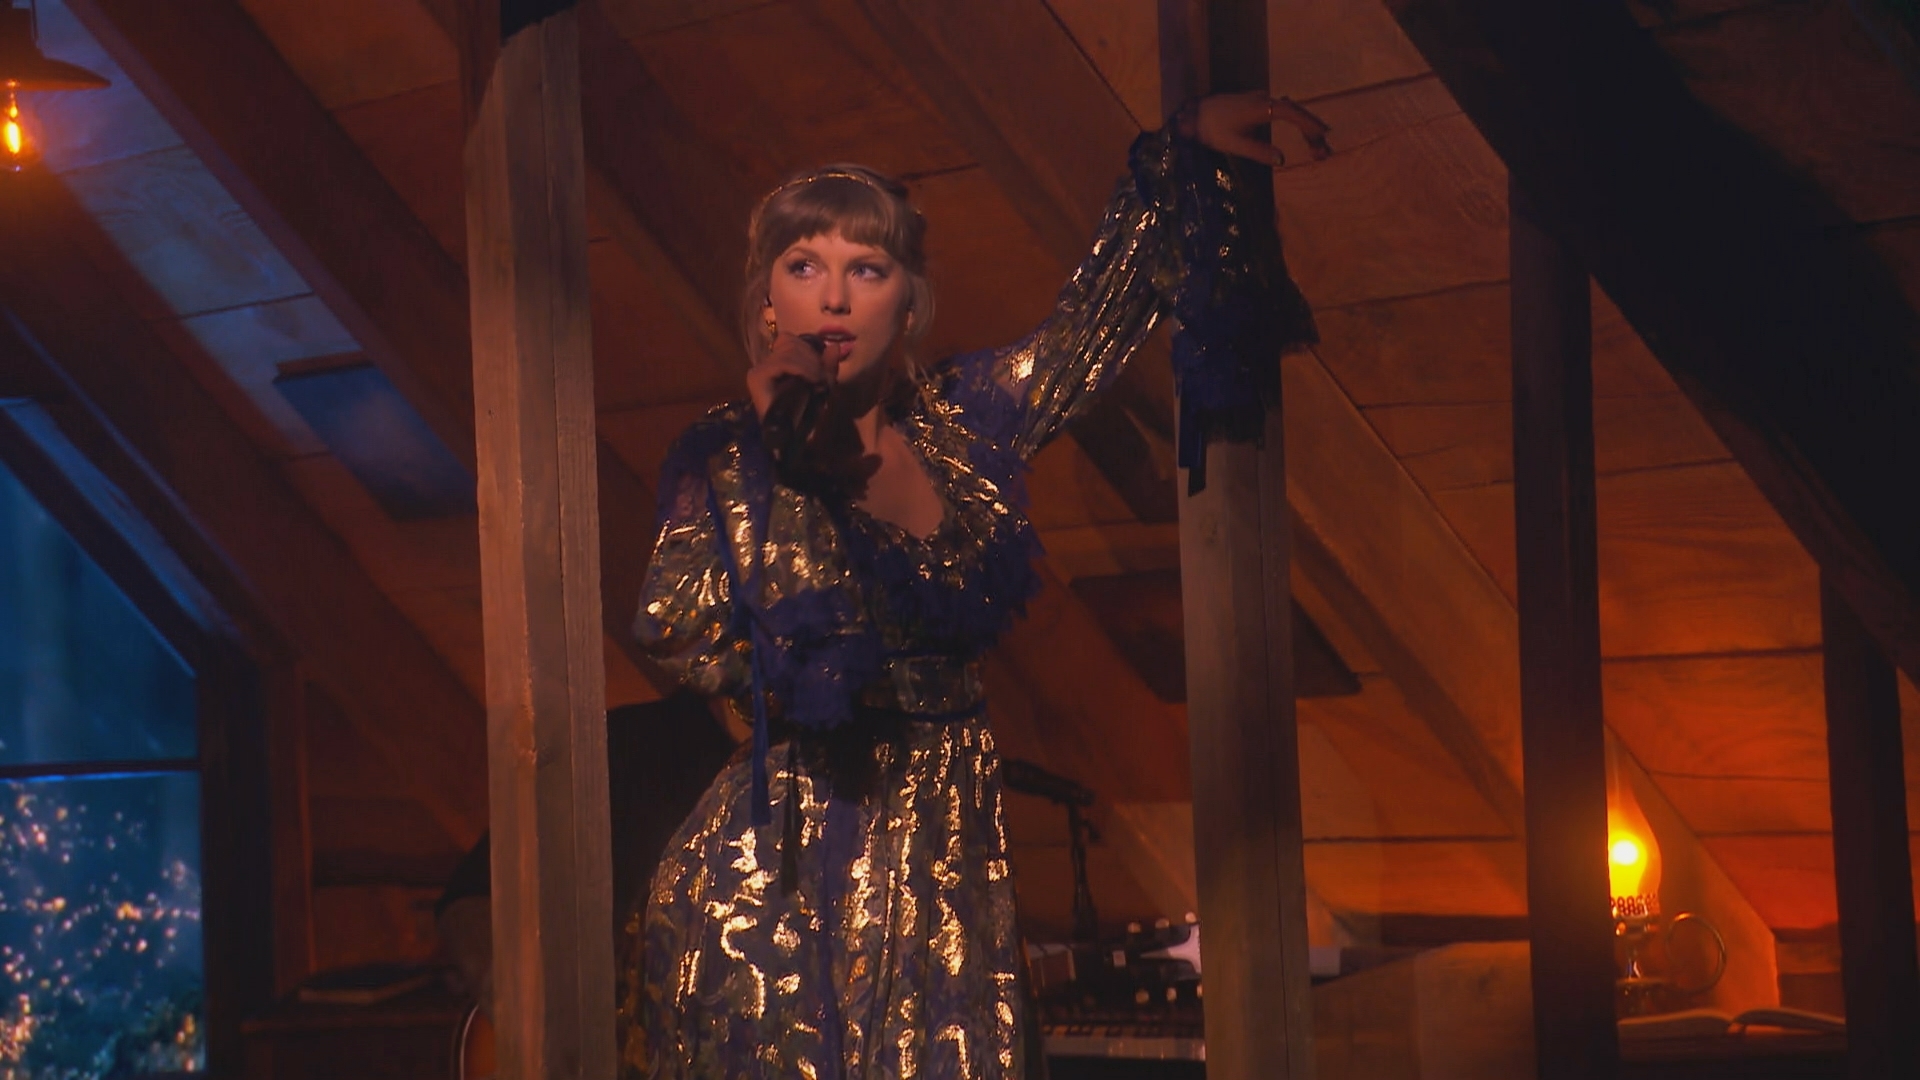 Taylor Swift leans against a wooden beam while performing at the 2021 Grammy Awards